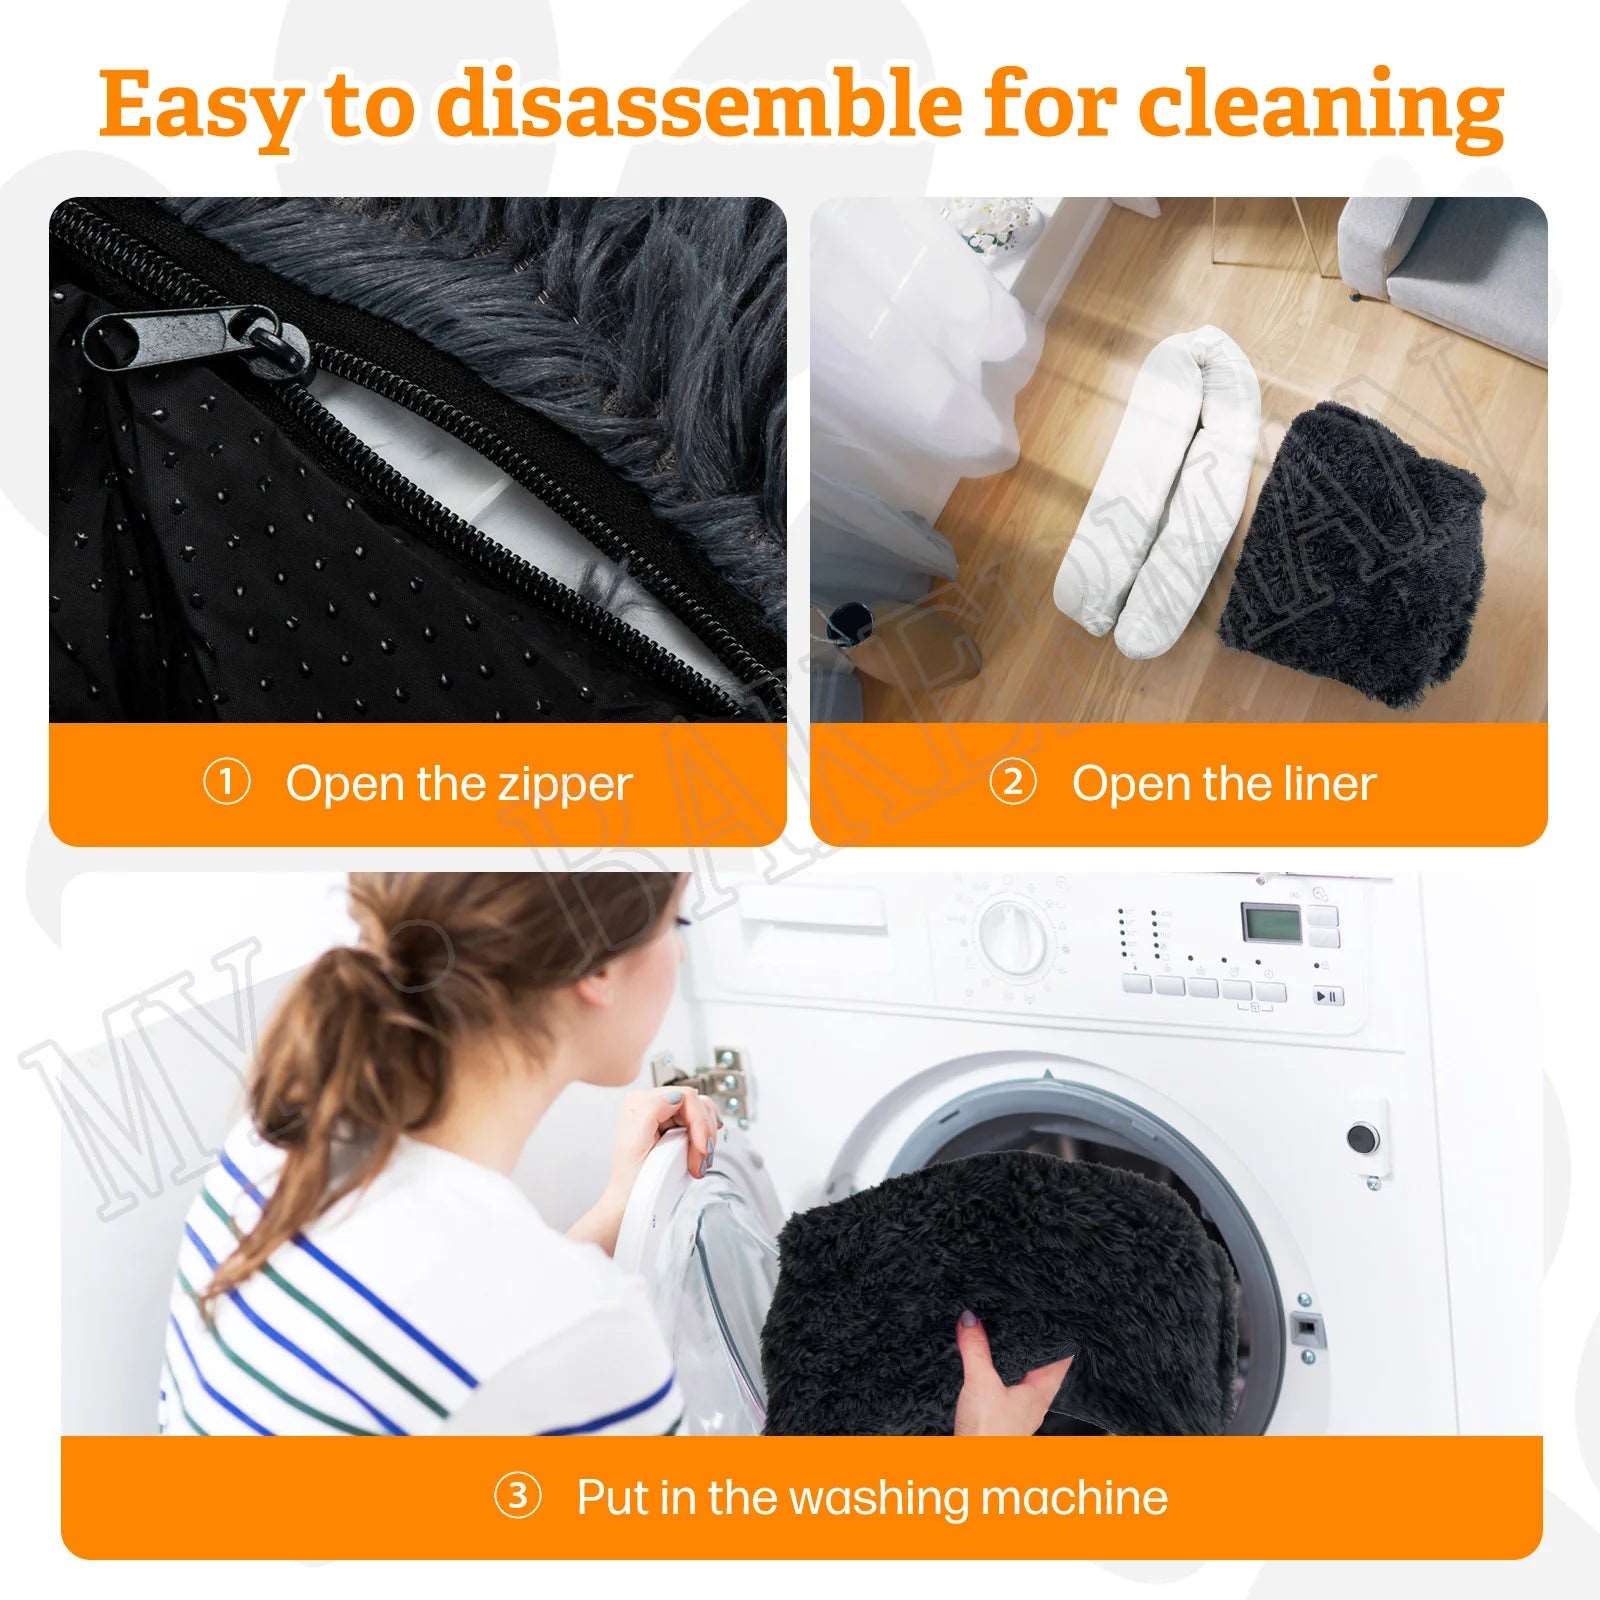 Easy to disassemble for cleaning